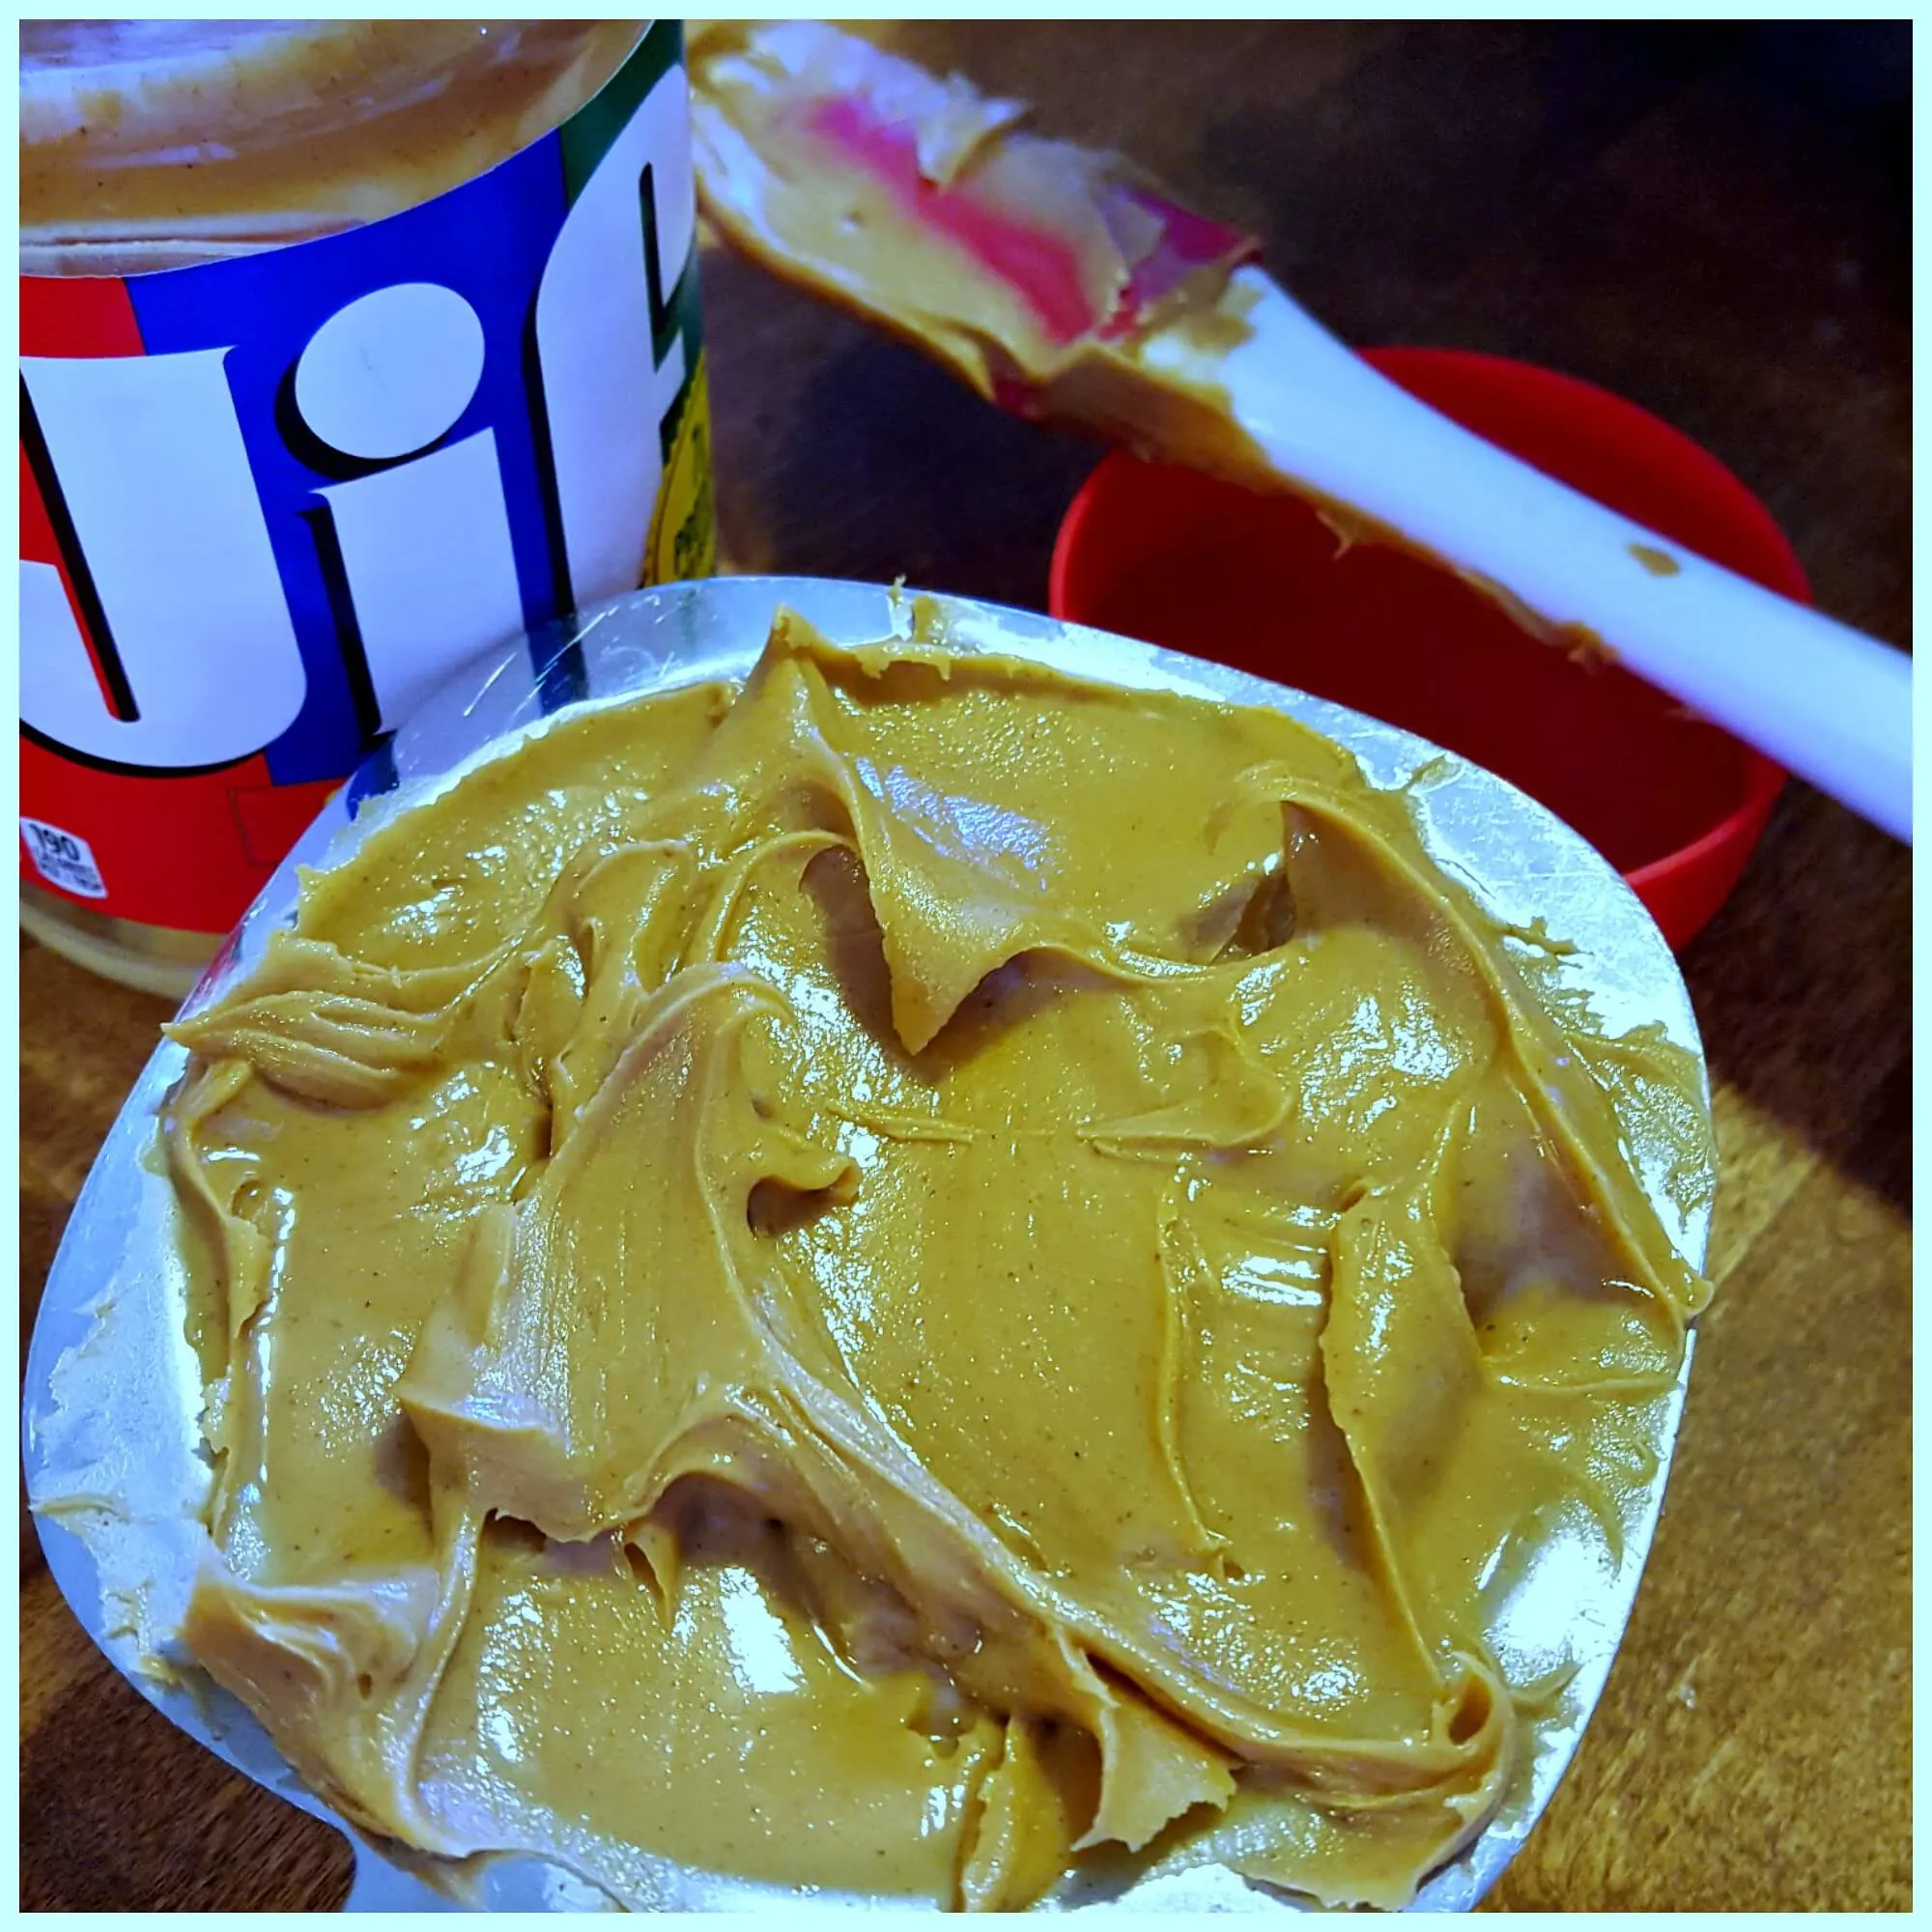 Jif Peanut Butter for baking cookies